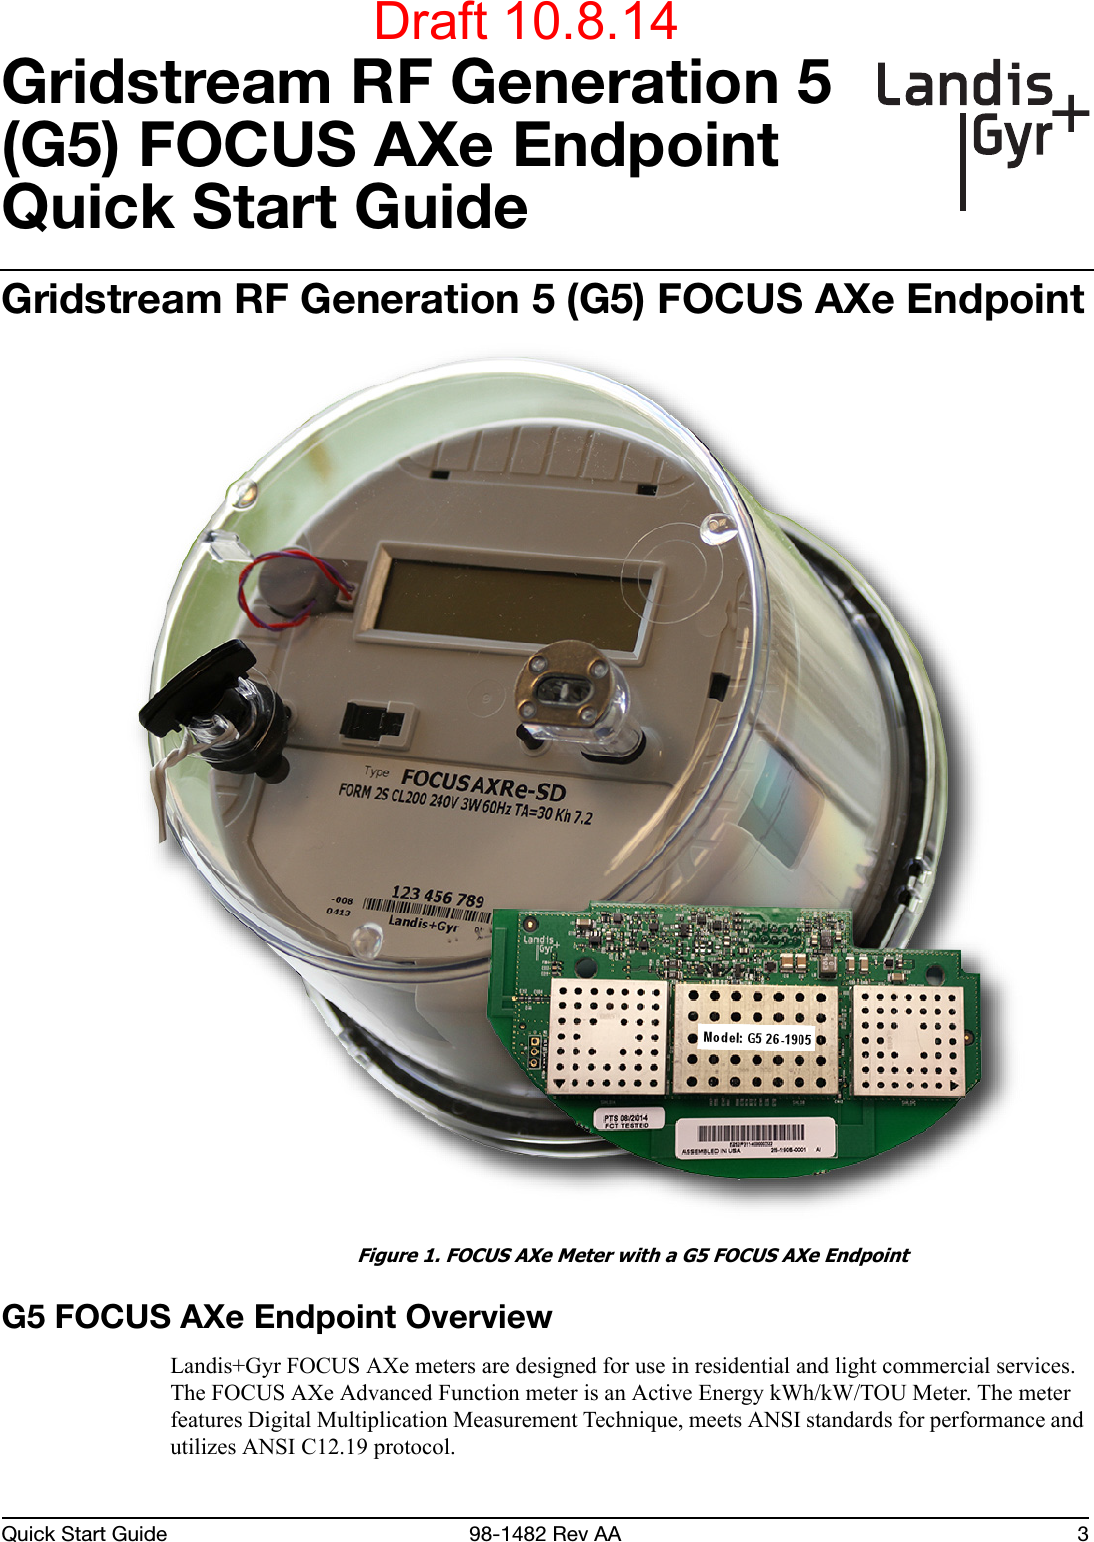 Quick Start Guide 98-1482 Rev AA 3Gridstream RF Generation 5 (G5) FOCUS AXe EndpointQuick Start GuideGridstream RF Generation 5 (G5) FOCUS AXe Endpoint Figure 1. FOCUS AXe Meter with a G5 FOCUS AXe EndpointG5 FOCUS AXe Endpoint OverviewLandis+Gyr FOCUS AXe meters are designed for use in residential and light commercial services. The FOCUS AXe Advanced Function meter is an Active Energy kWh/kW/TOU Meter. The meter features Digital Multiplication Measurement Technique, meets ANSI standards for performance and utilizes ANSI C12.19 protocol.Draft 10.8.14